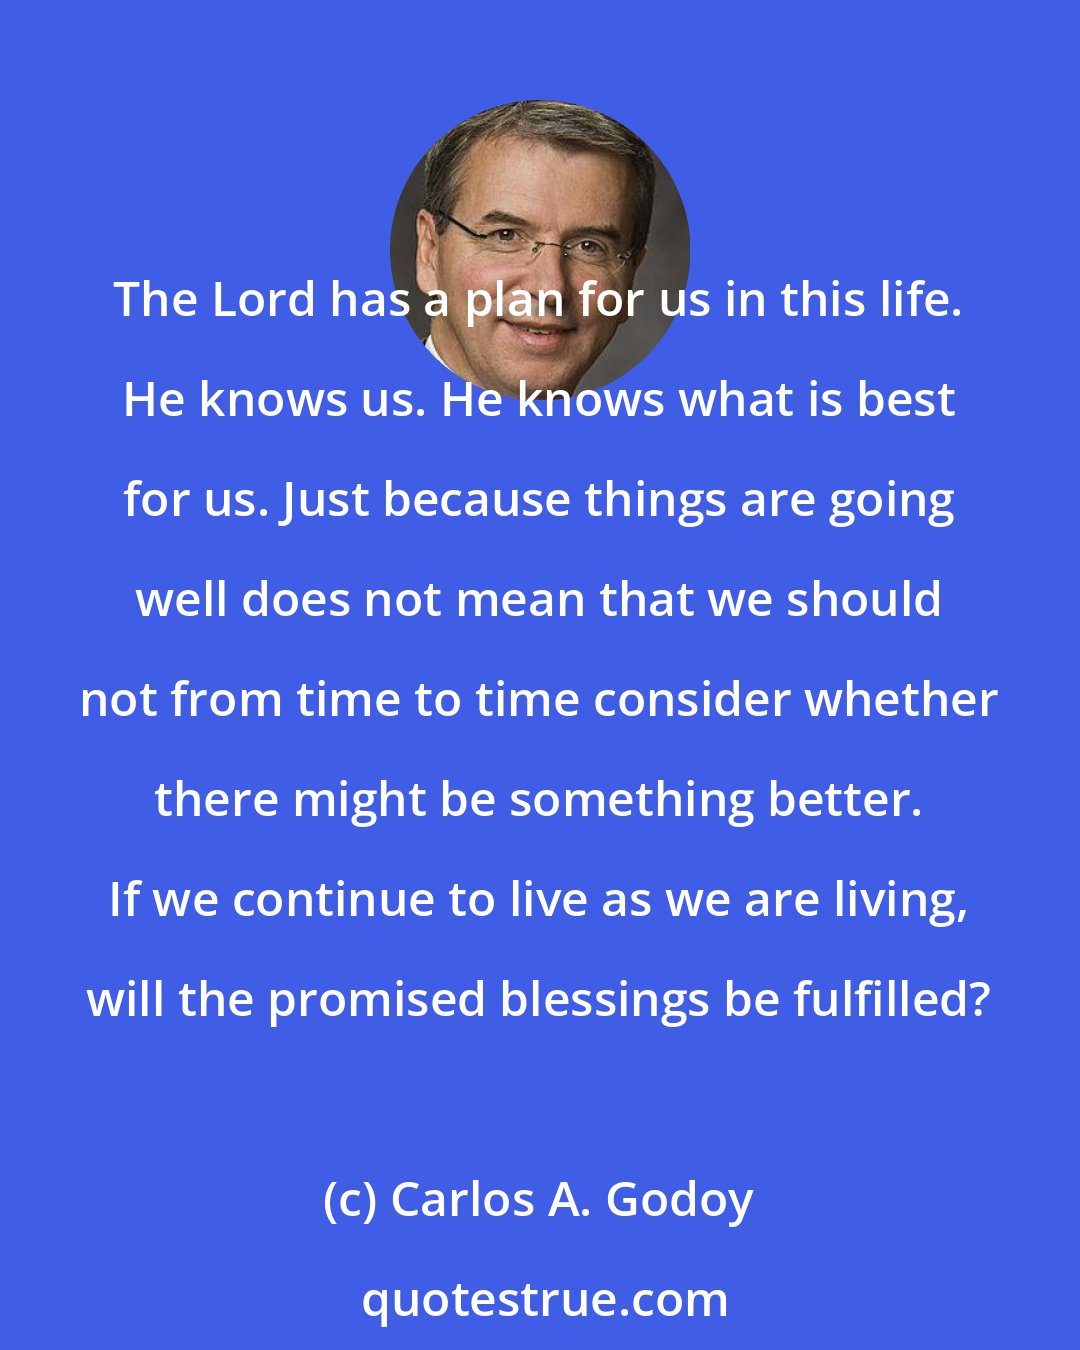 Carlos A. Godoy: The Lord has a plan for us in this life. He knows us. He knows what is best for us. Just because things are going well does not mean that we should not from time to time consider whether there might be something better. If we continue to live as we are living, will the promised blessings be fulfilled?